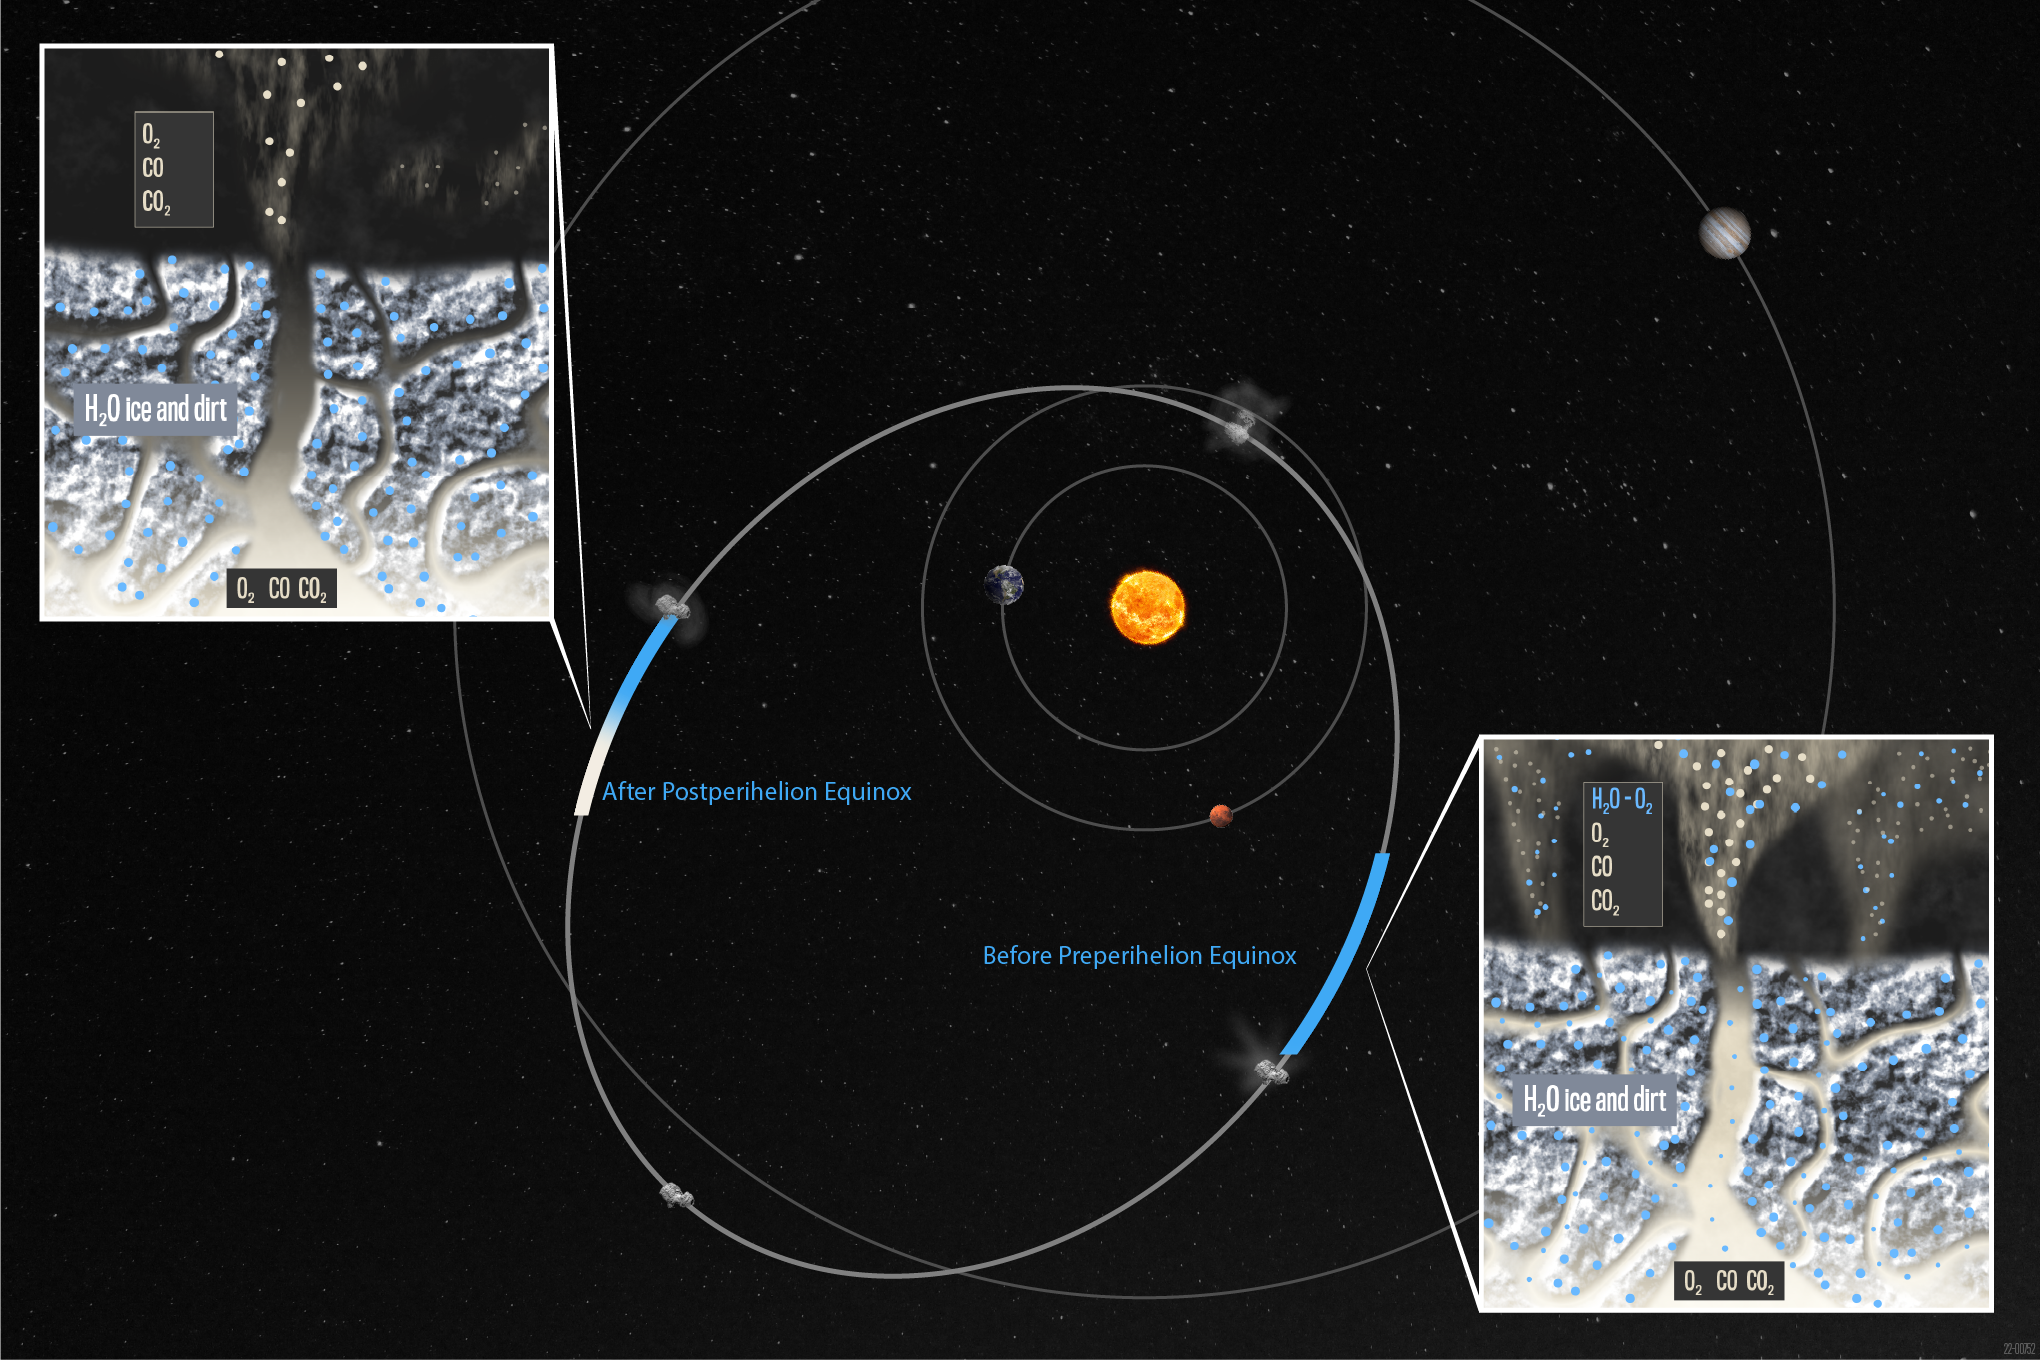 Diagram showing comet 67P's orbit and its two reservoirs of oxygen